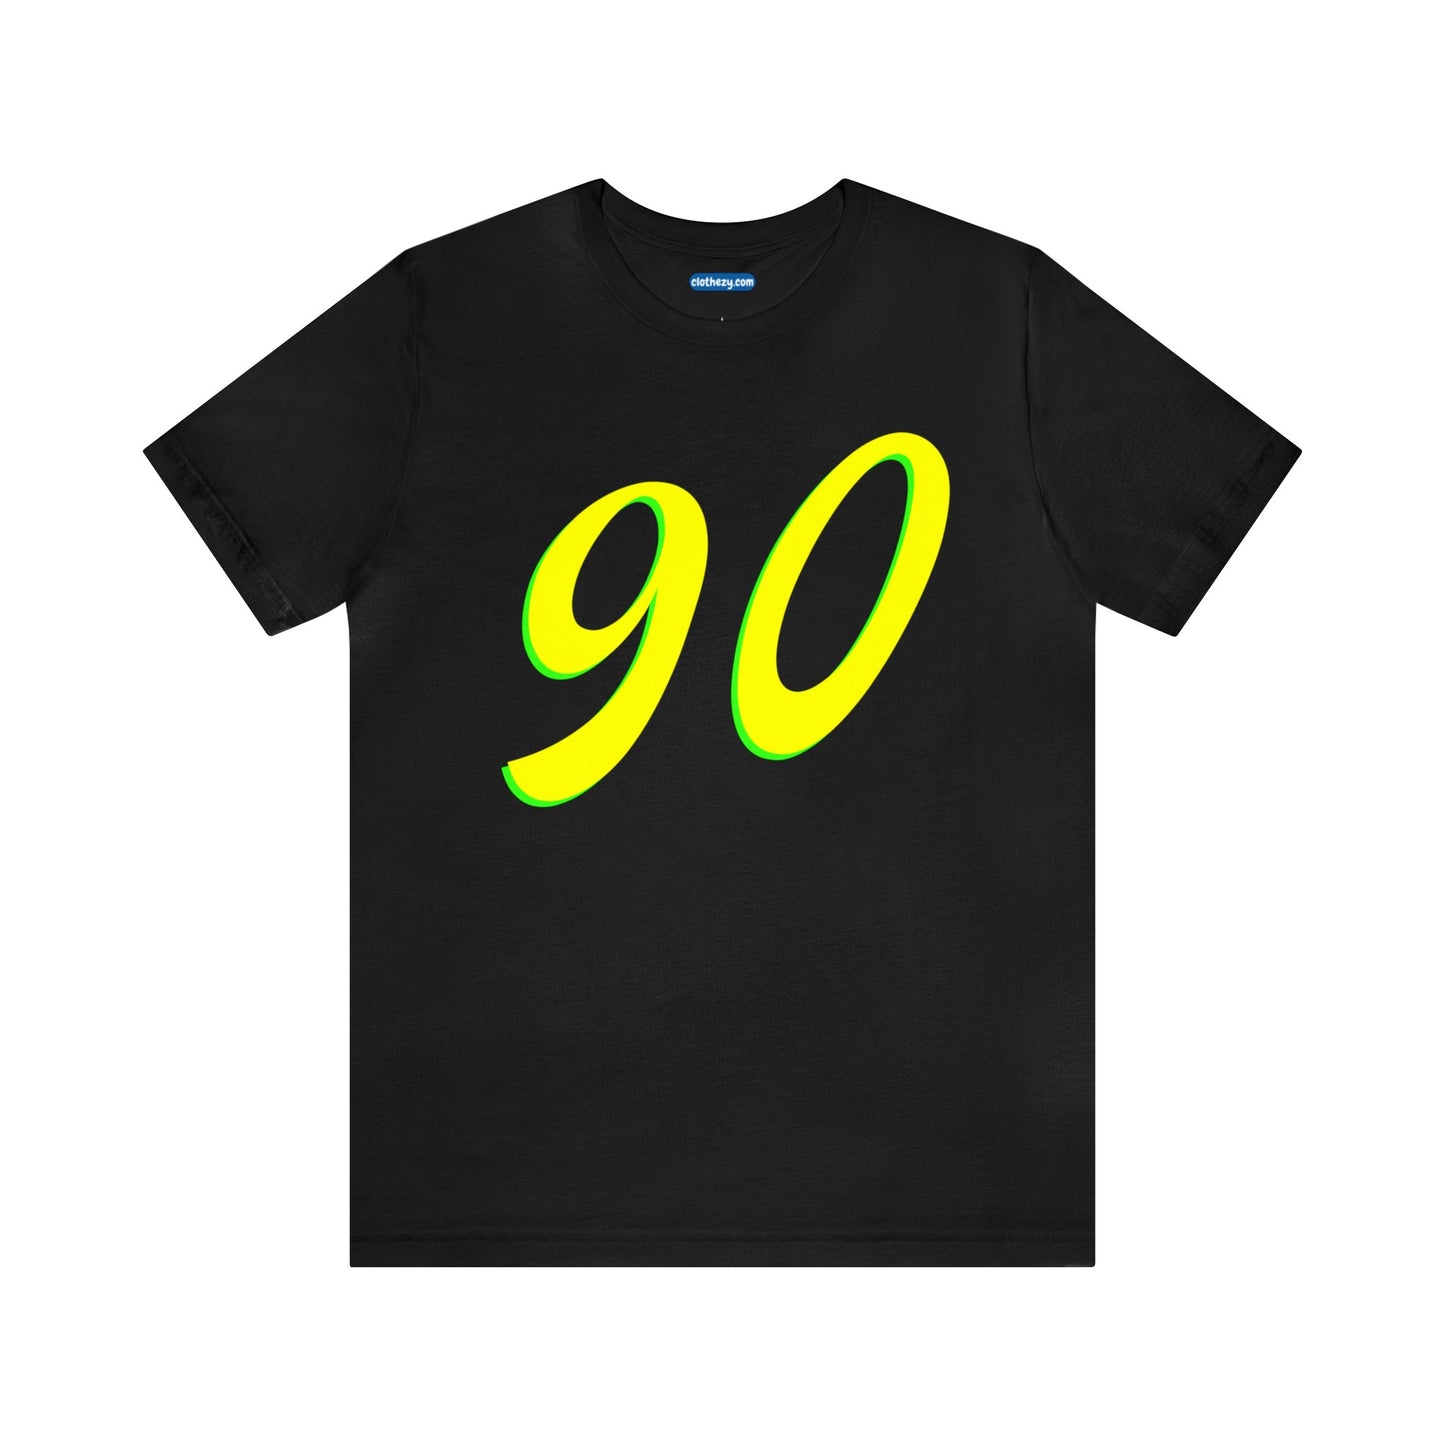 Number 90 Design - Soft Cotton Tee for birthdays and celebrations, Gift for friends and family, Multiple Options by clothezy.com in Dark Grey Heather Size Small - Buy Now